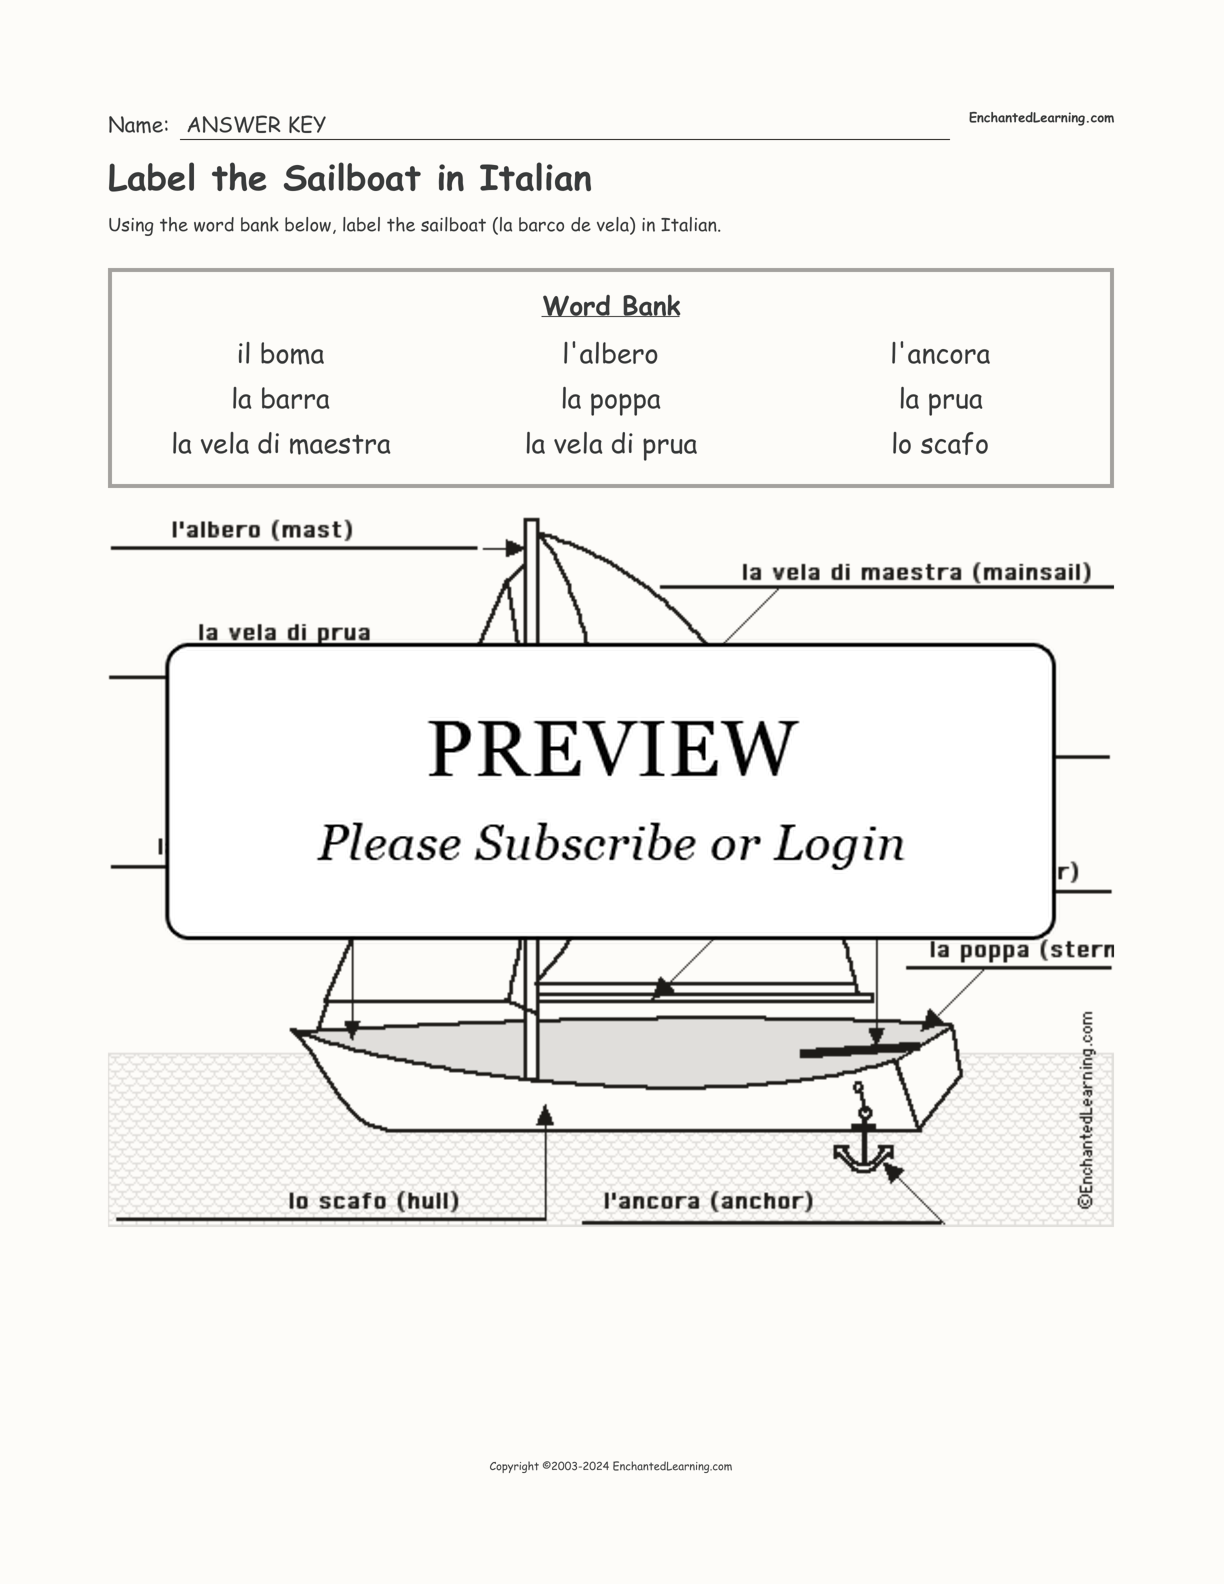 Label the Sailboat in Italian interactive worksheet page 2